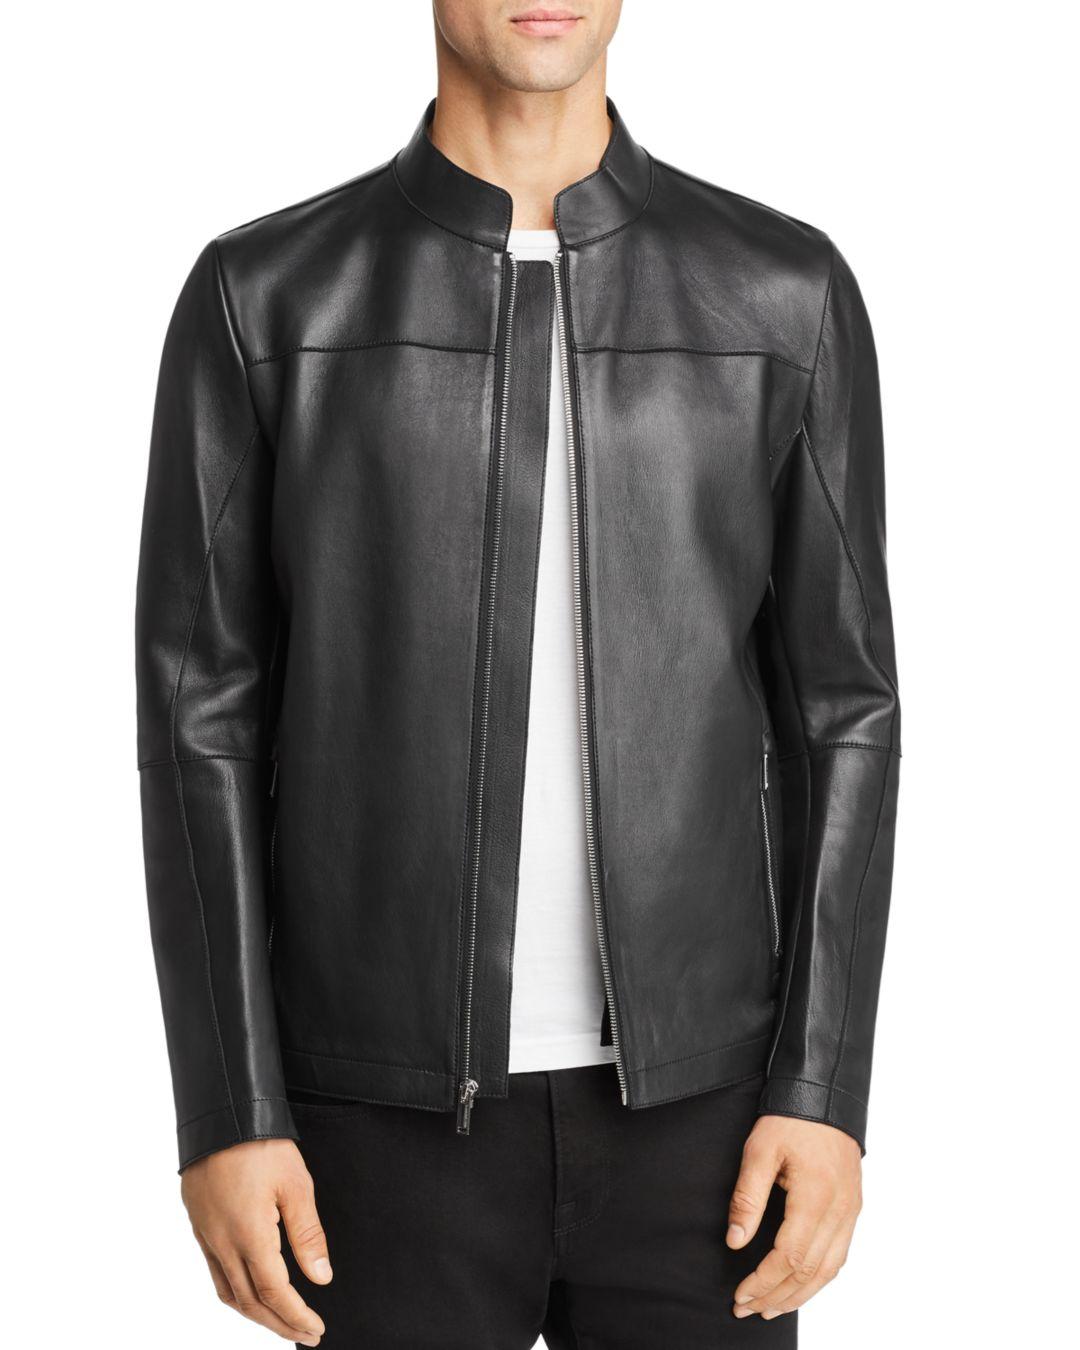 Karl Lagerfeld Double - Faced Leather Jacket in Black for Men - Lyst